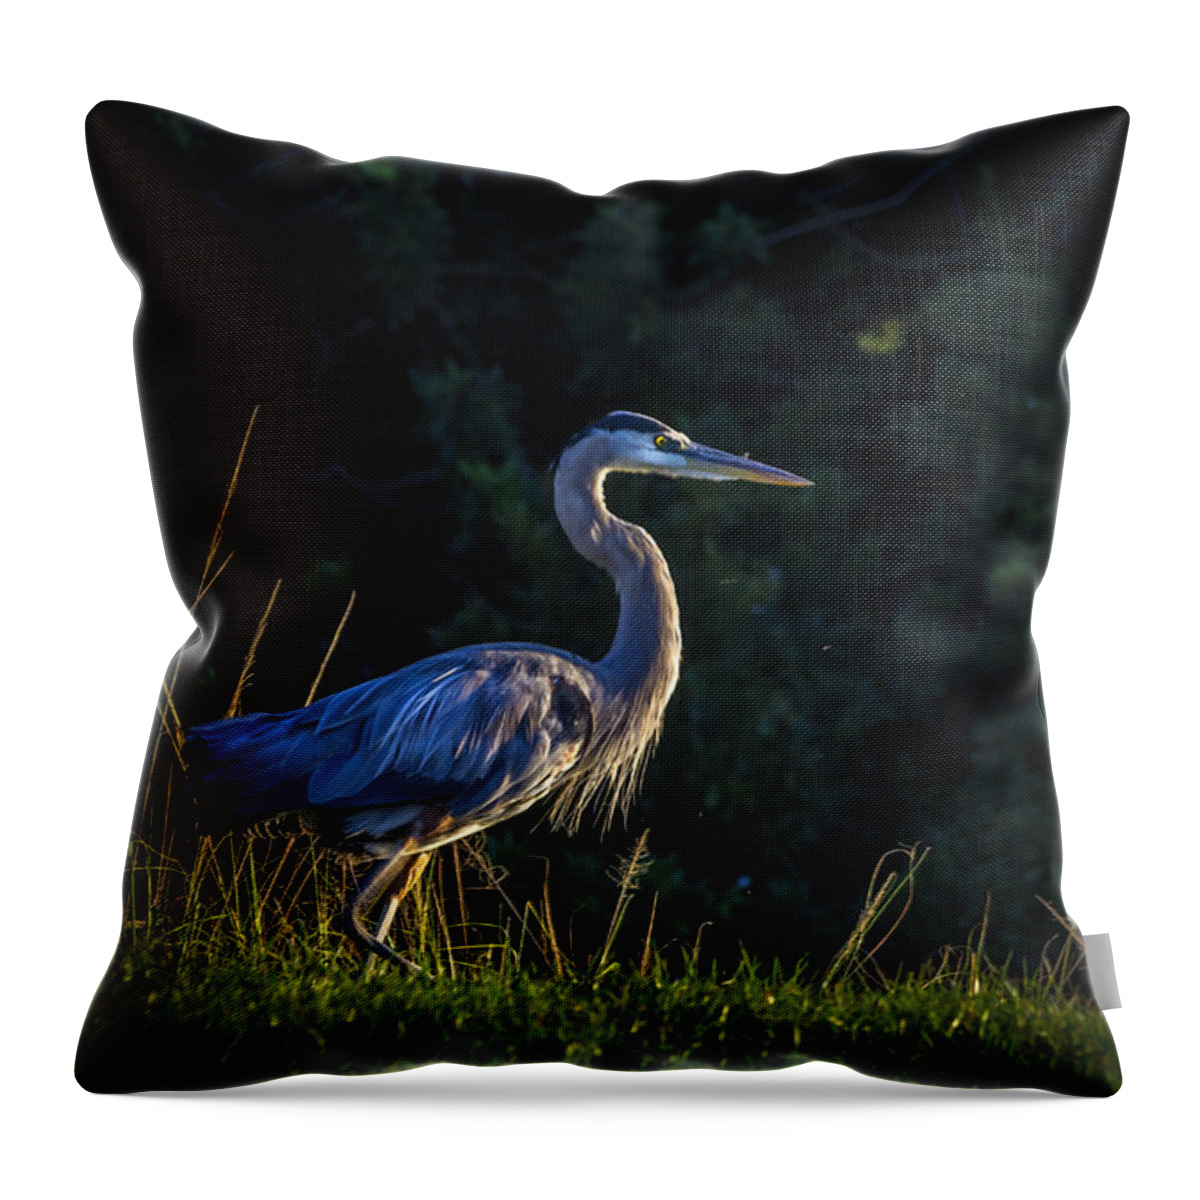 Lakeland Throw Pillow featuring the photograph On The March by Marvin Spates